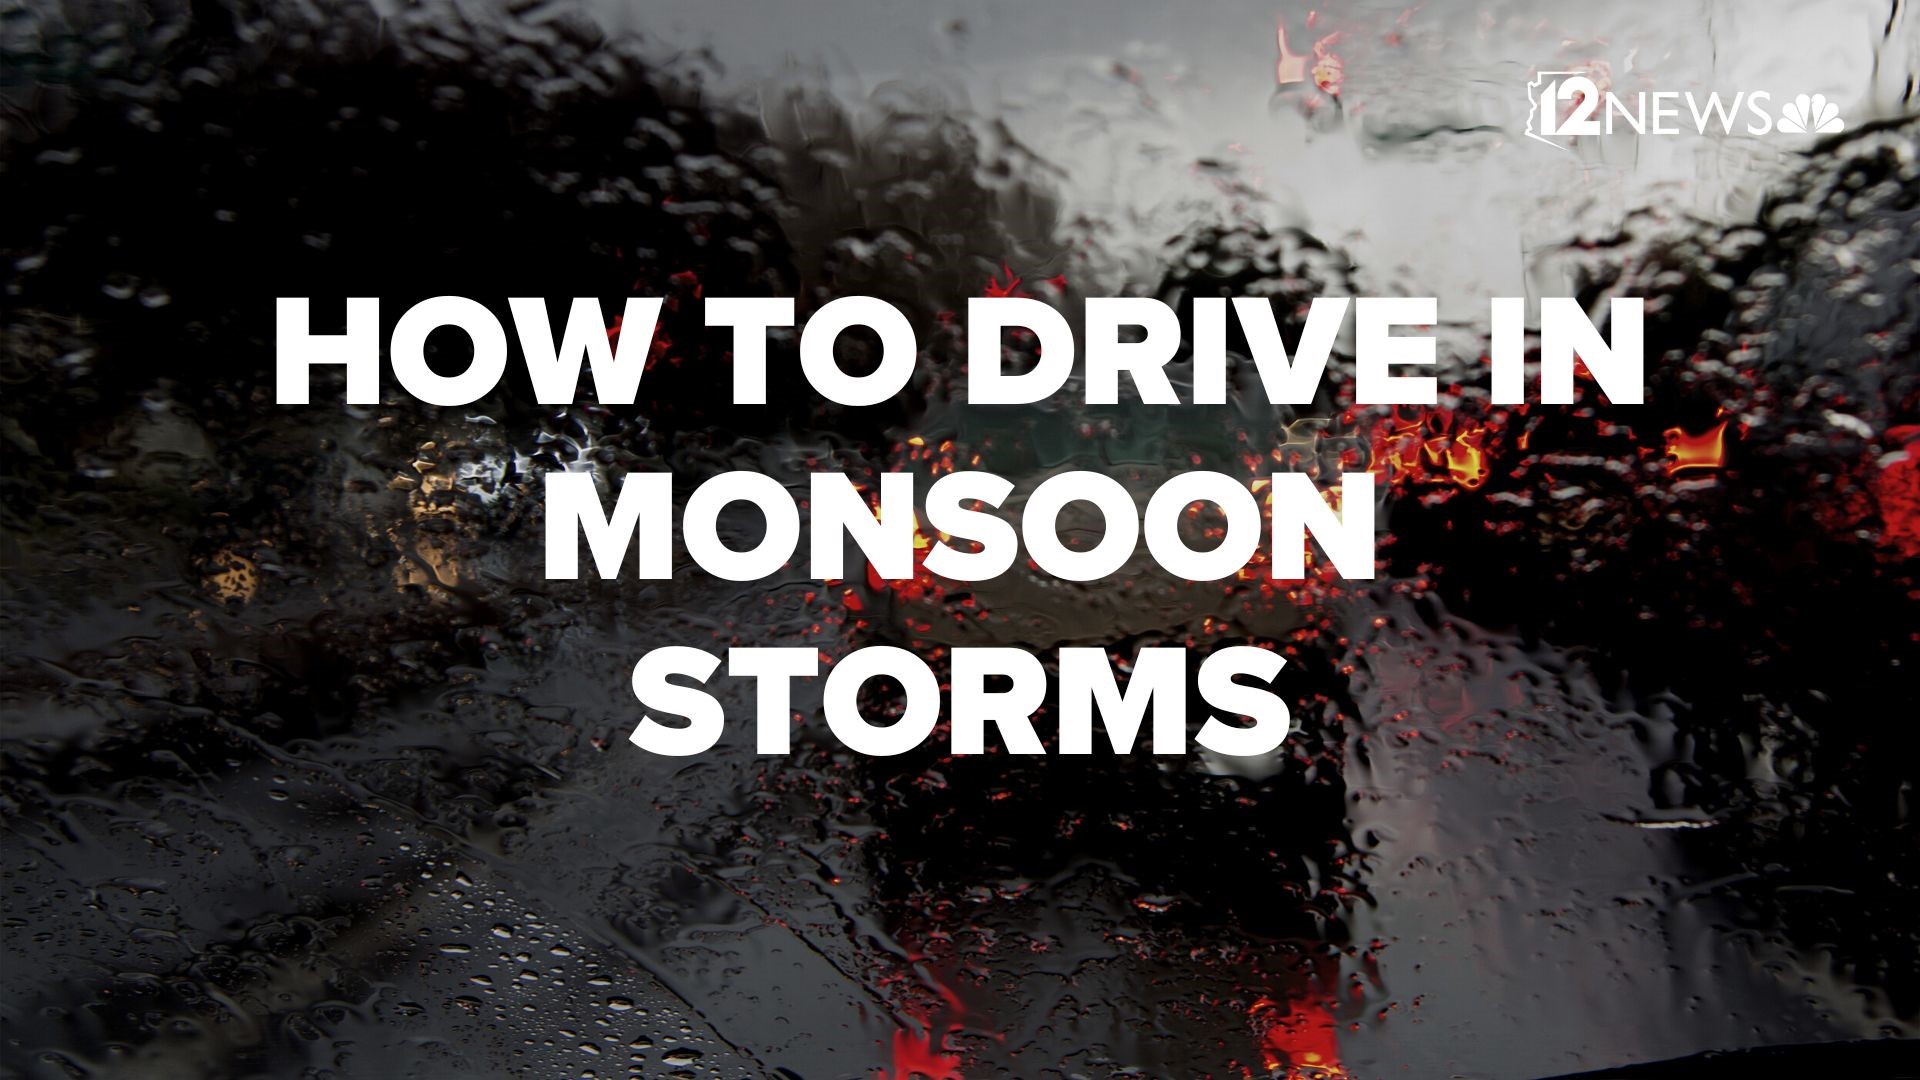 Many Arizona drivers are unprepared for the heavy rain and flooding that comes with the monsoon. Here are the do's and don'ts for driving in a monsoon storm.